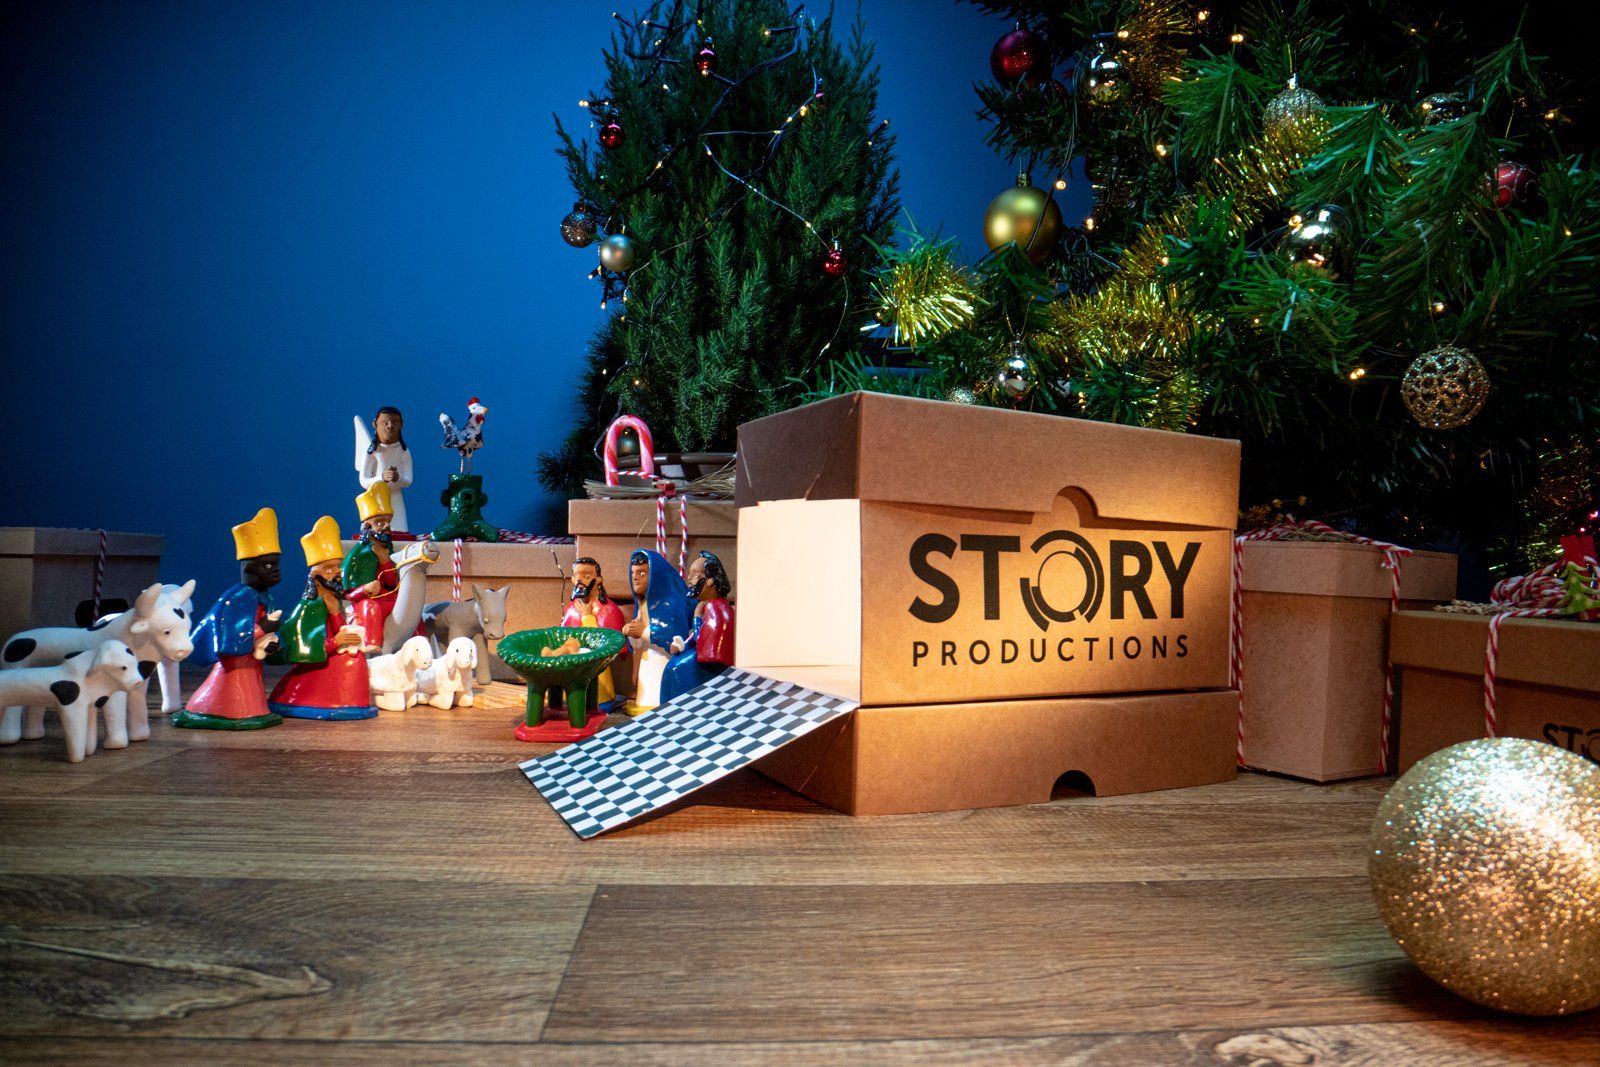 An opened box with the Story Productions logo and Christmas ornaments in the background